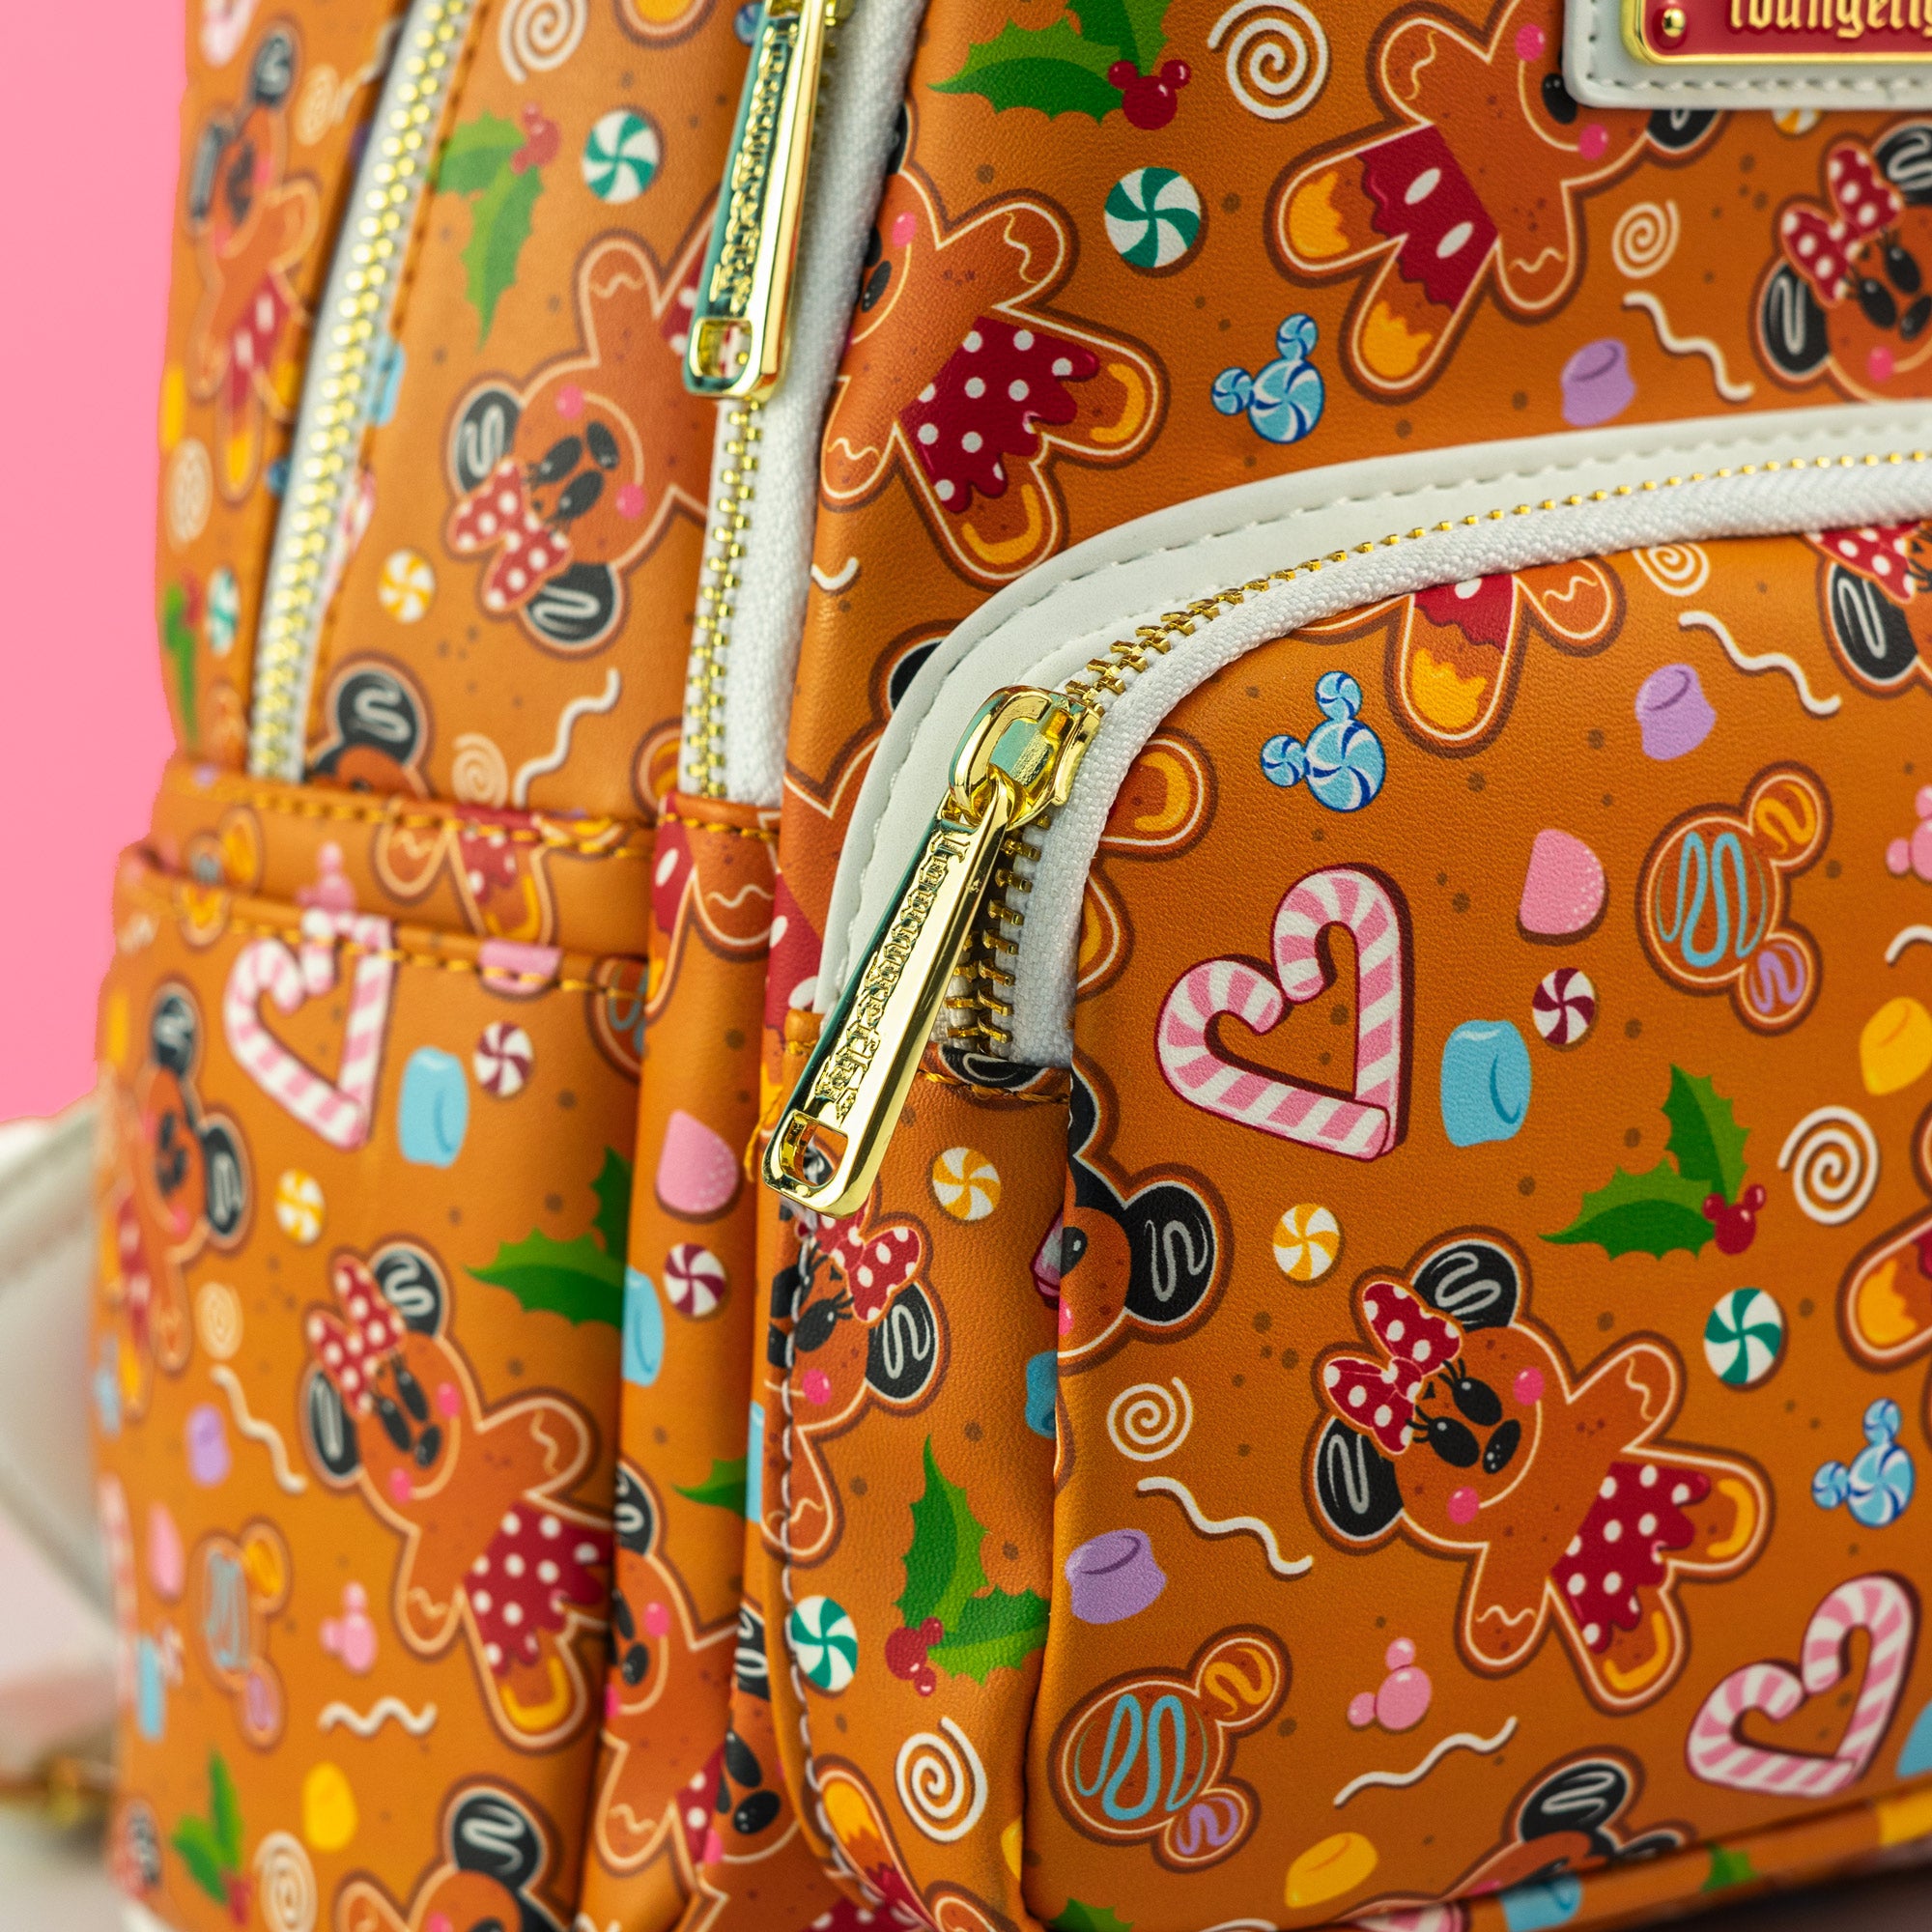 Loungefly x Disney Gingerbread All Over Print Mini Backpack and Headband Set